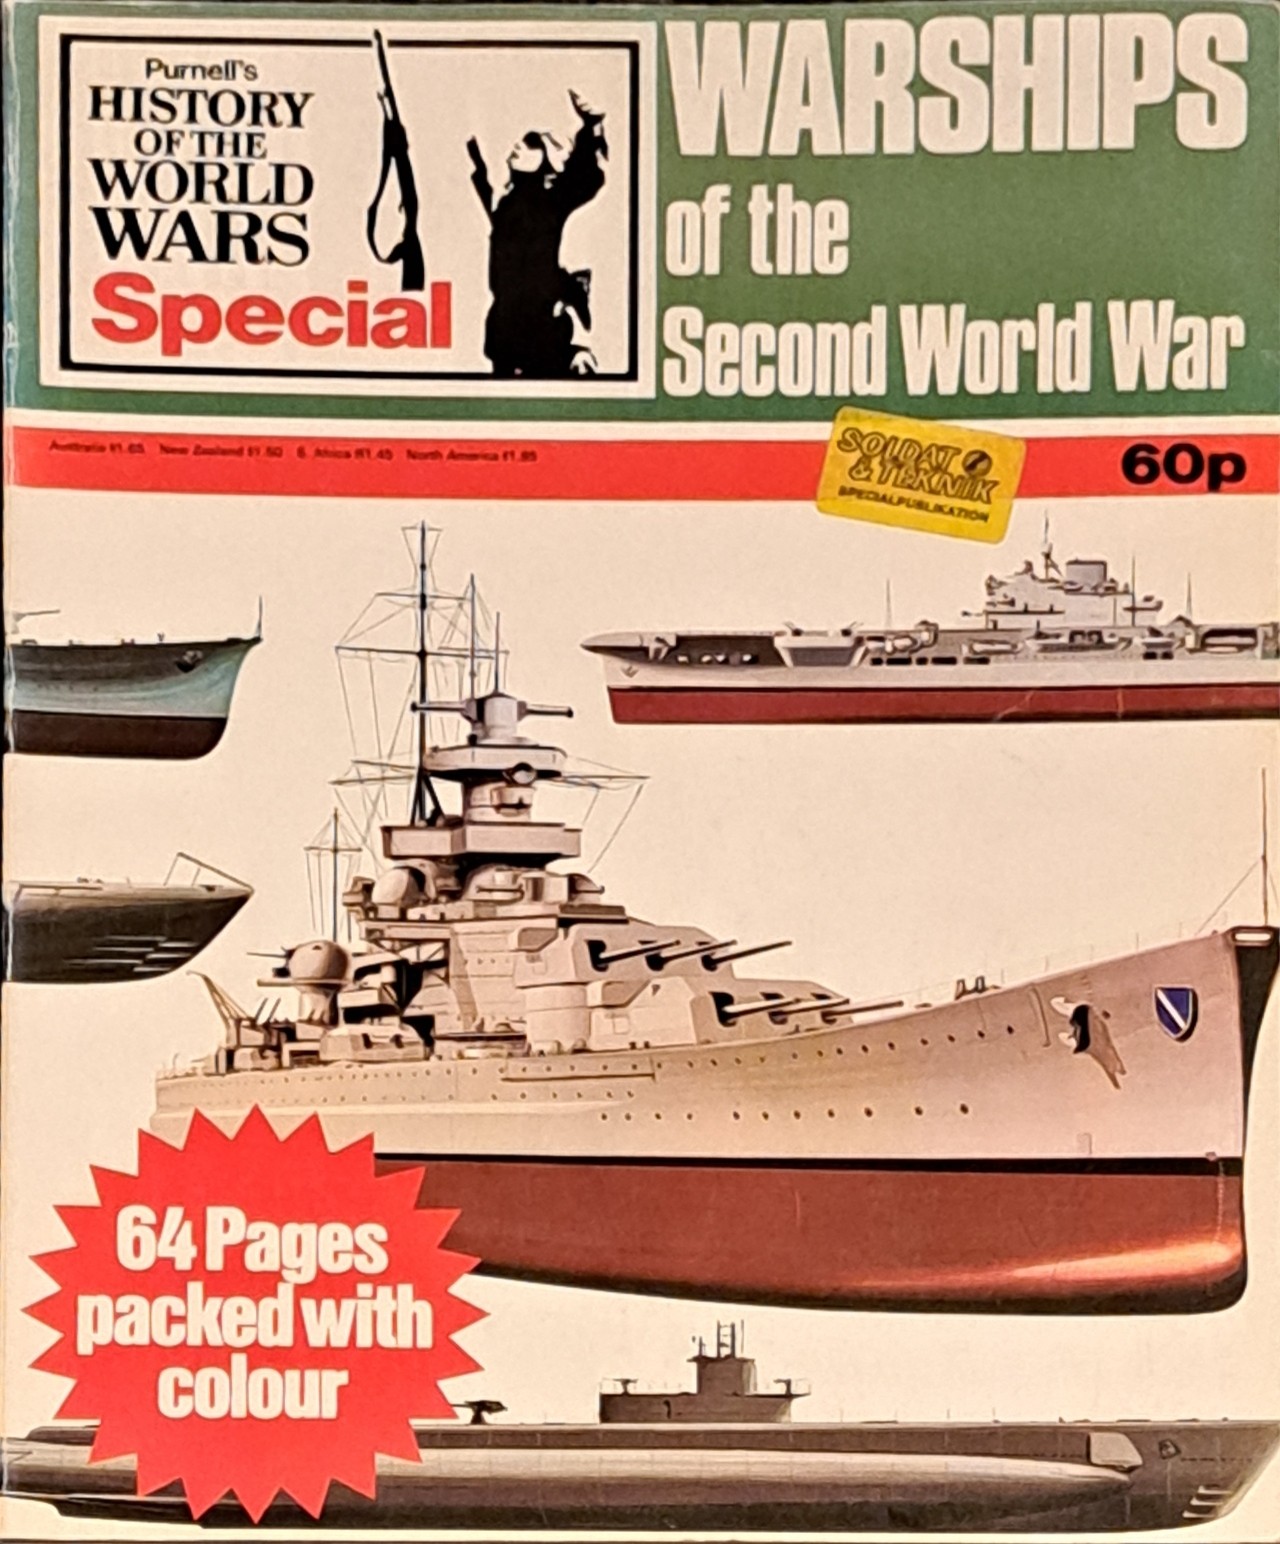 Warships of WWII - Purnells History of the World Wars Special